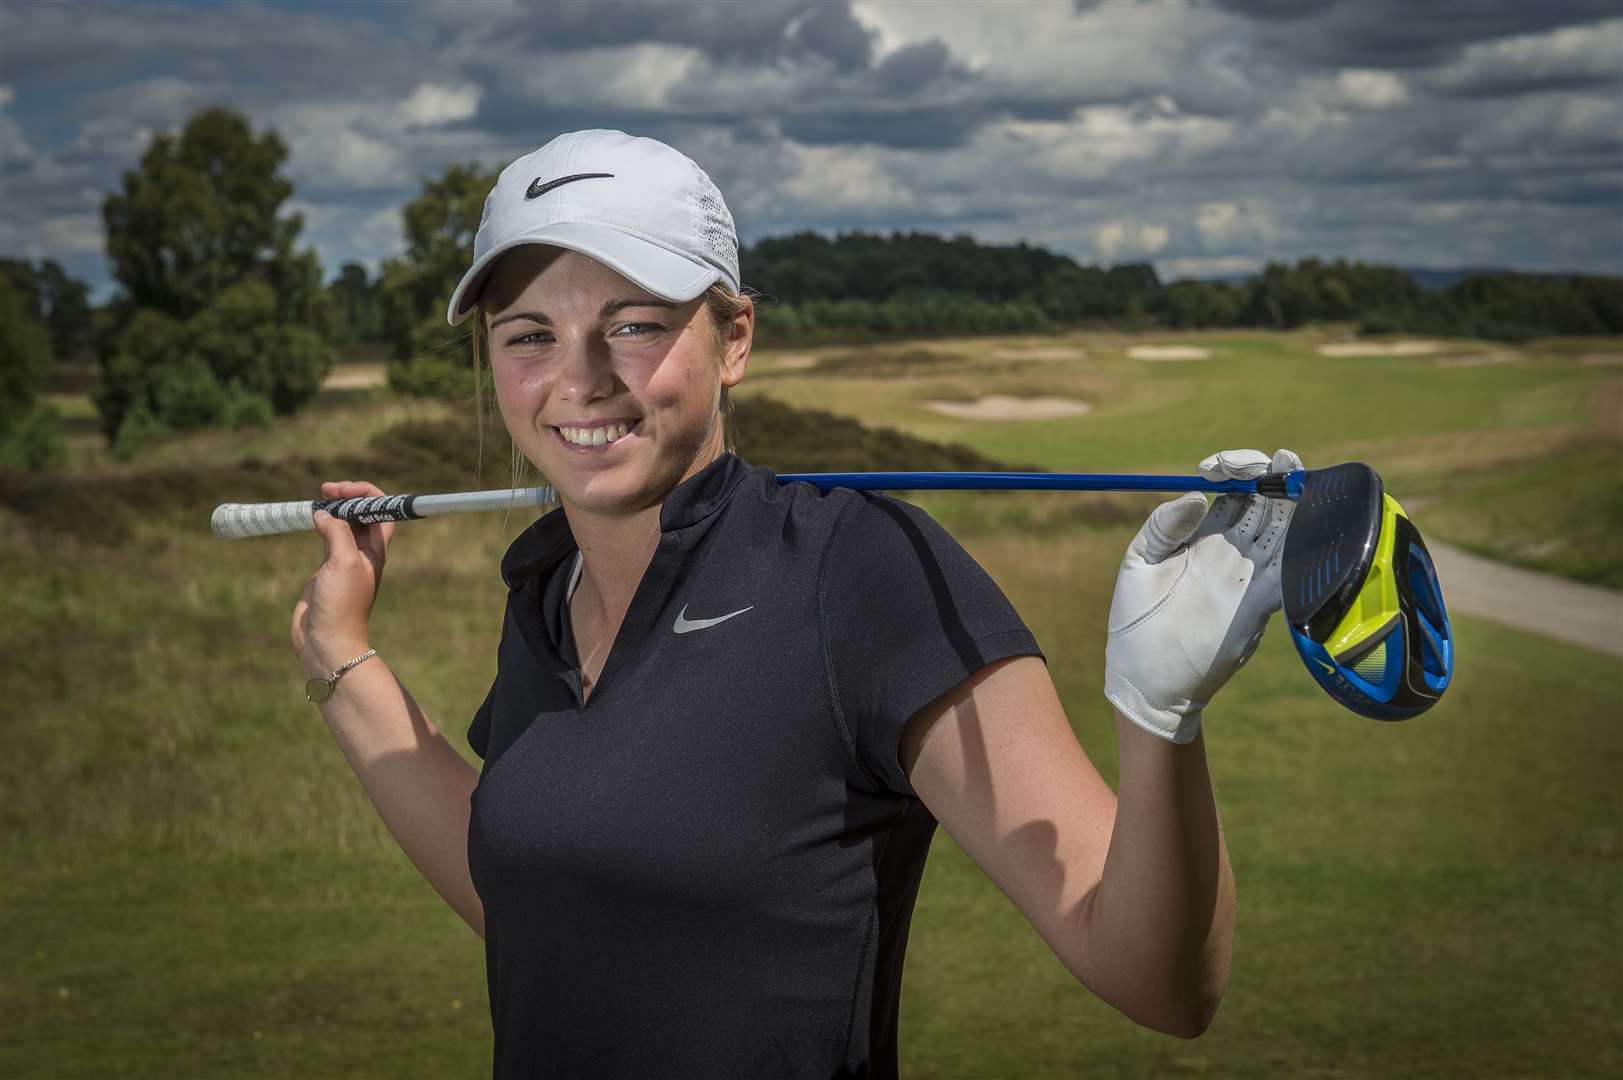 Hannah McCook who is in action at the Final Stage of Q School at La Manga in Spain.